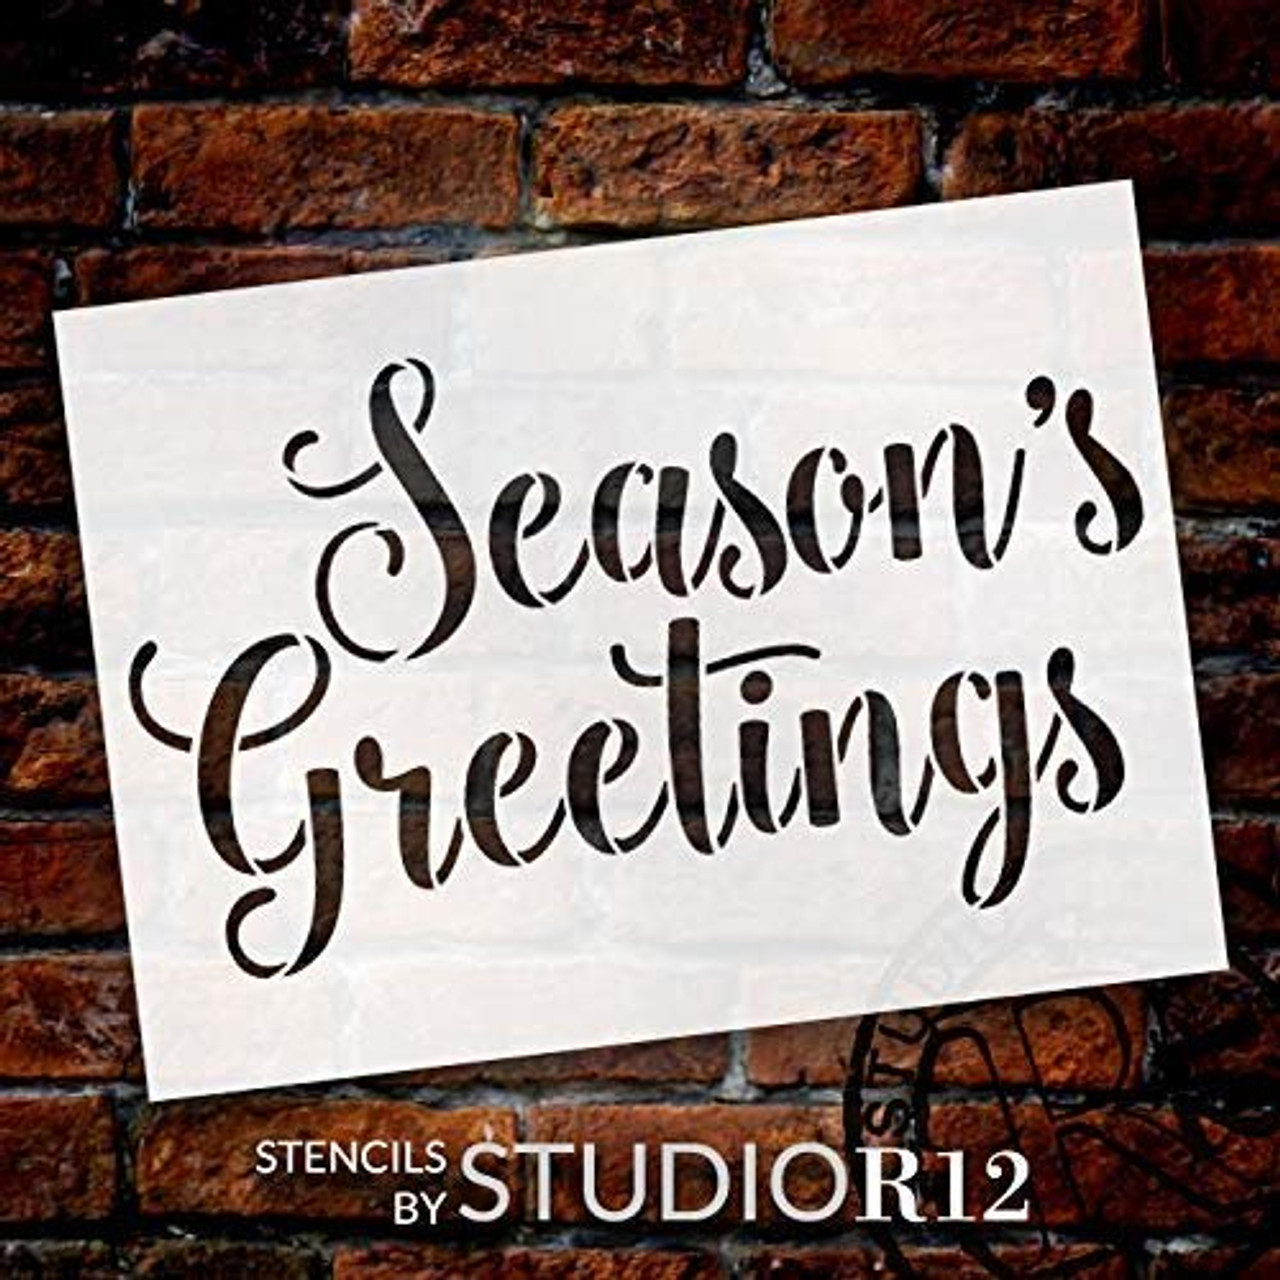 Seasons Greetings Stencil by StudioR12 - Cursive Script | Reusable Mylar Template | Paint Wood Sign | Craft Christmas Word Art Gift | Rustic DIY Holiday Home Decor | Select Size